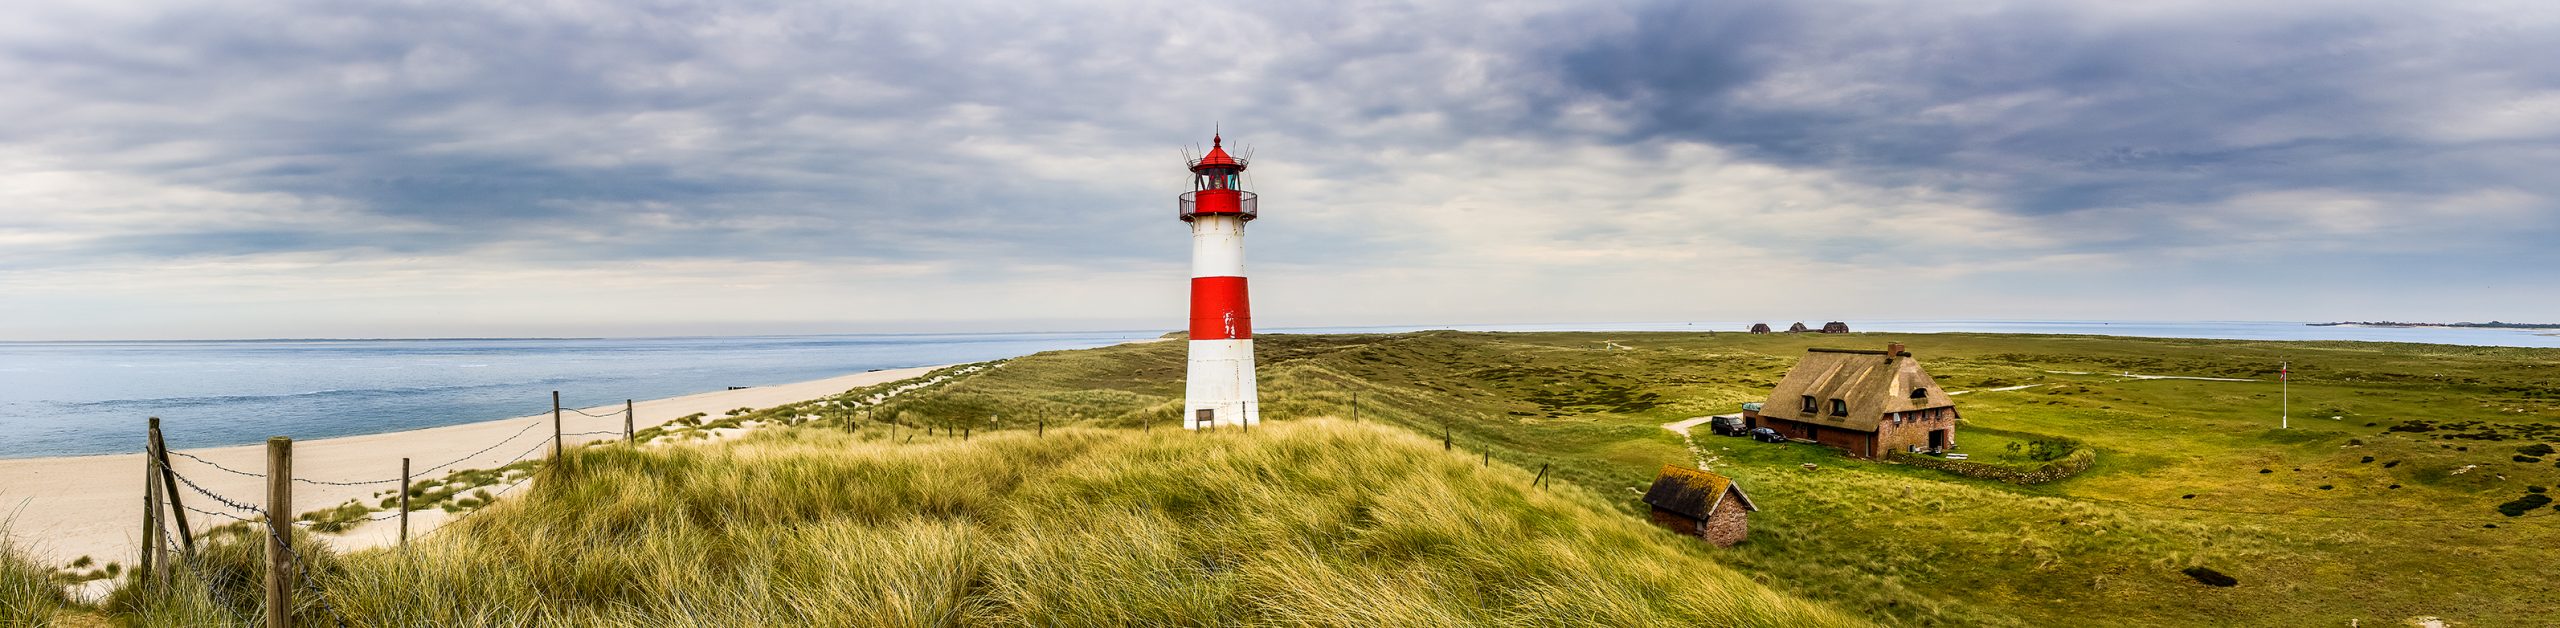 The lighthouse List Ost on the Ellenbogen of the island Sylt at the german northern sea coast